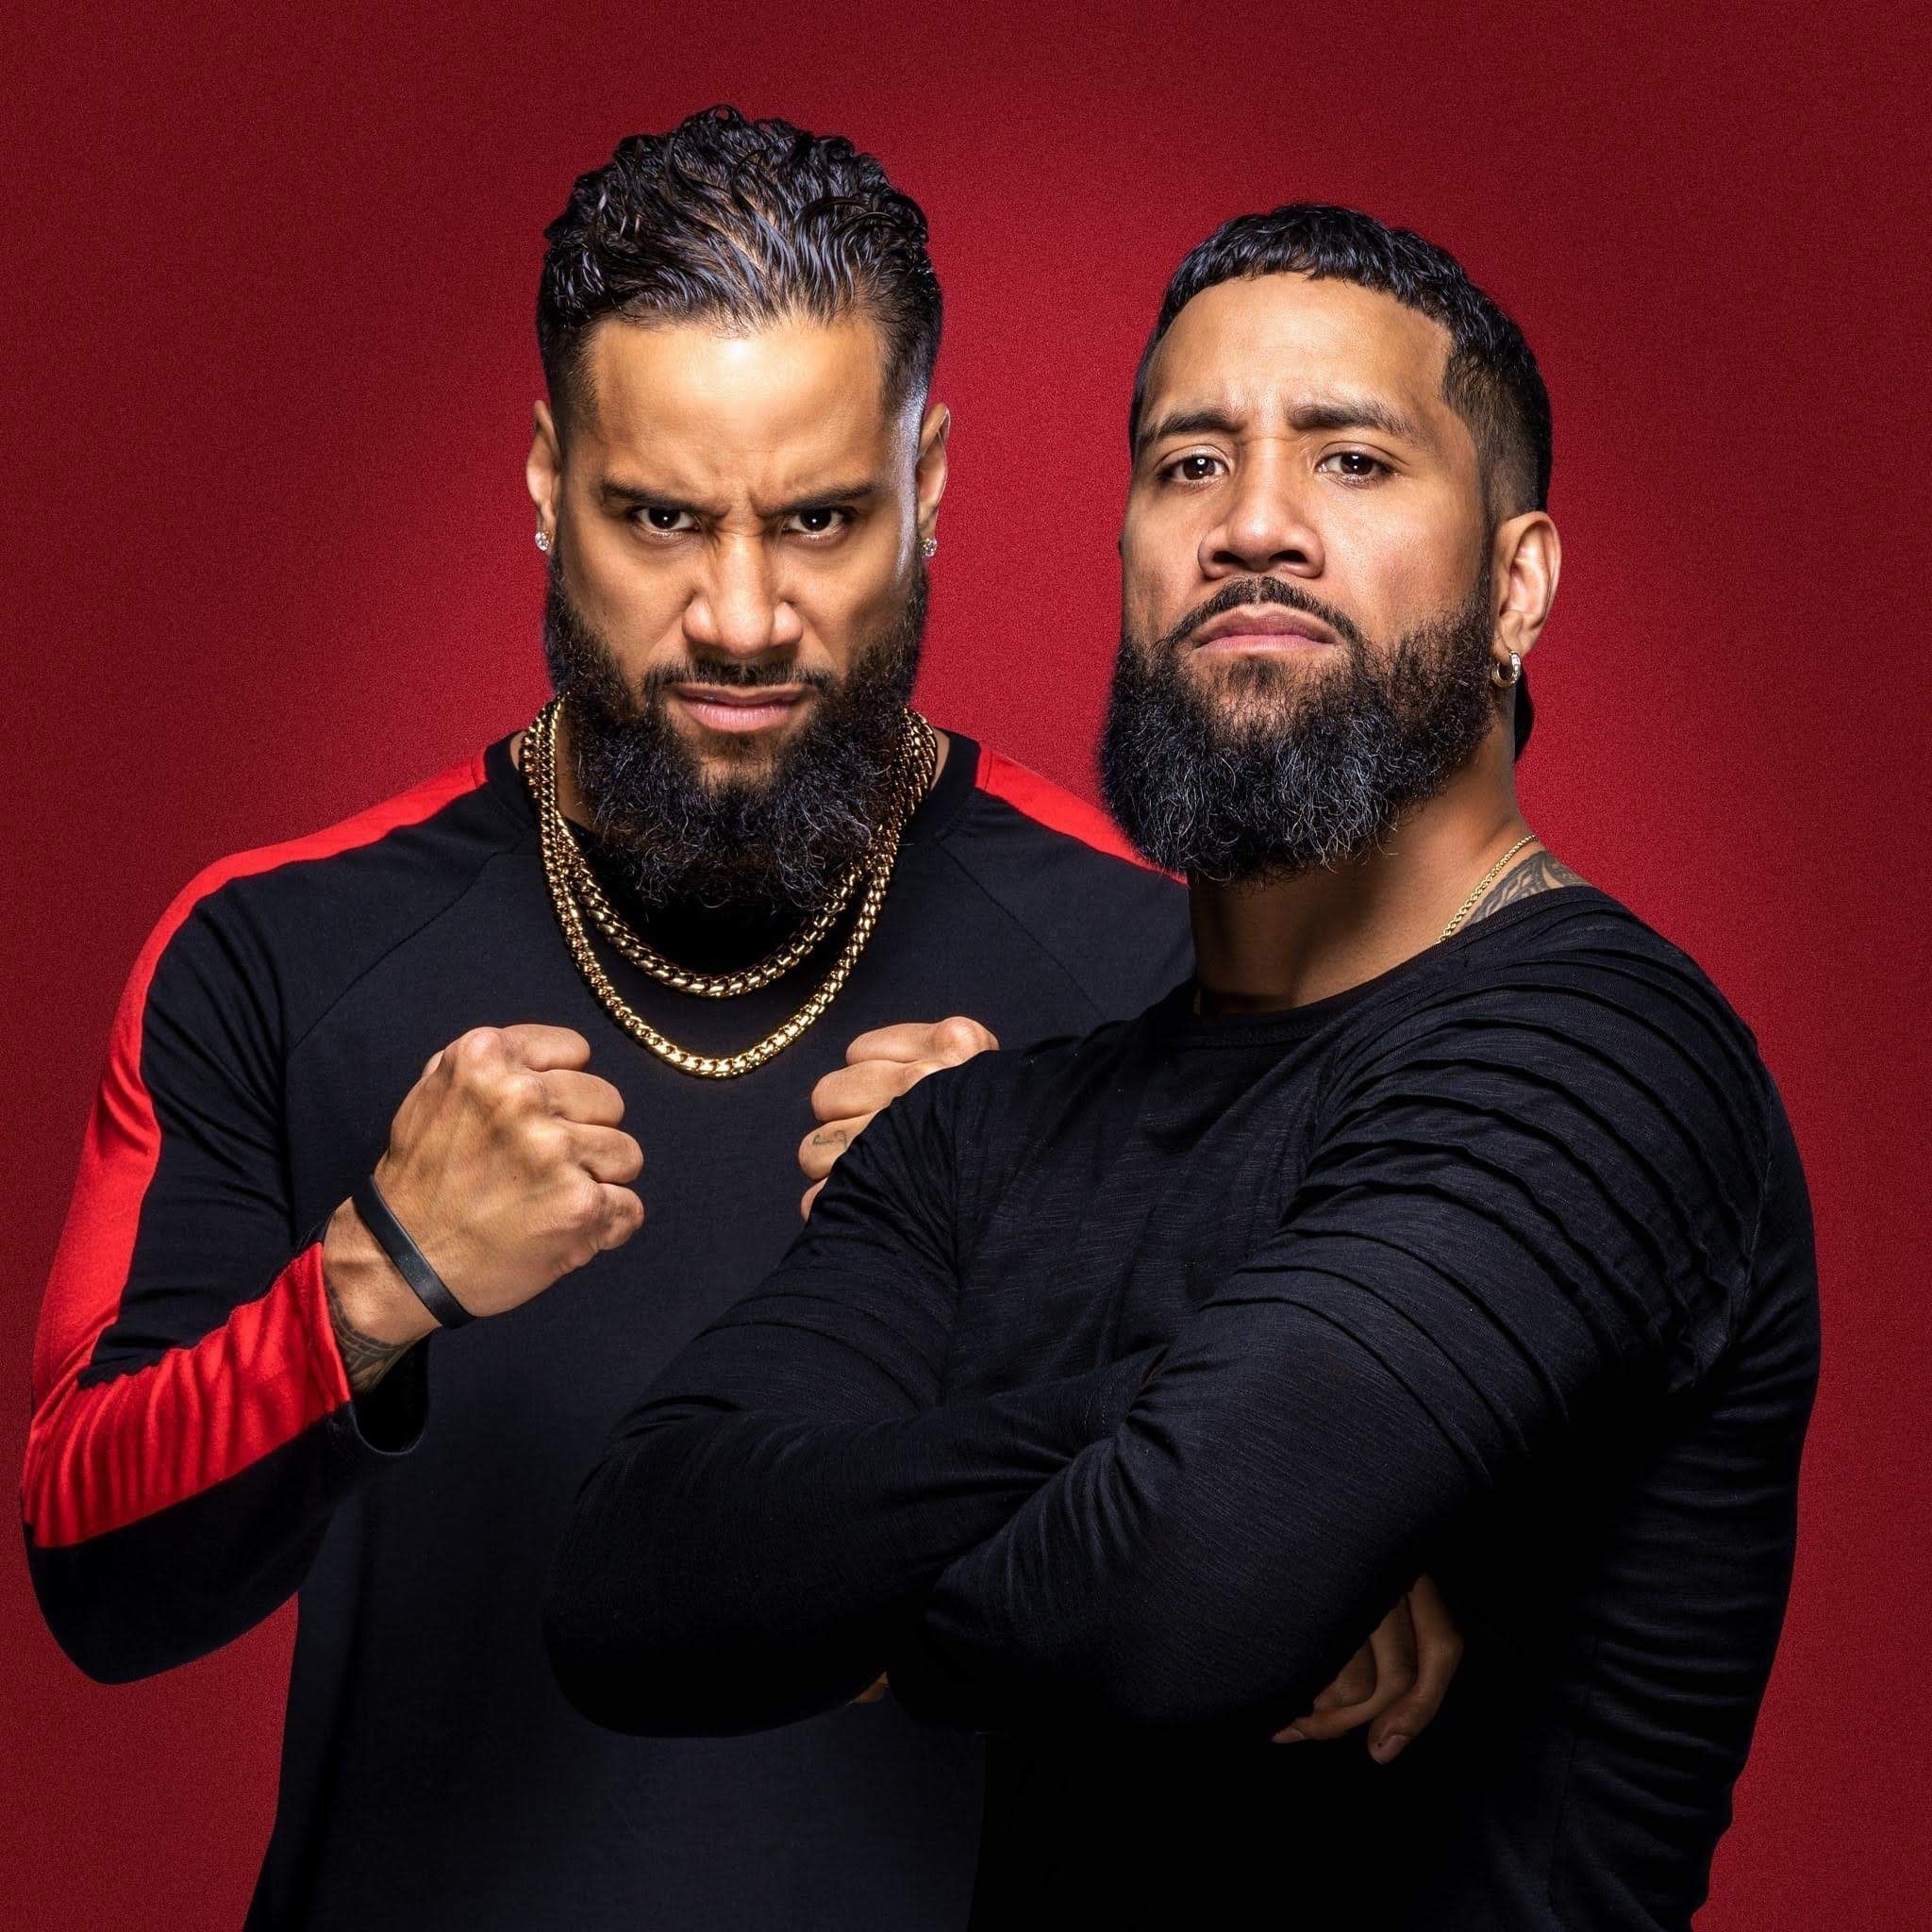 The Usos posted by Ryan Peltier, jey uso HD phone wallpaper | Pxfuel